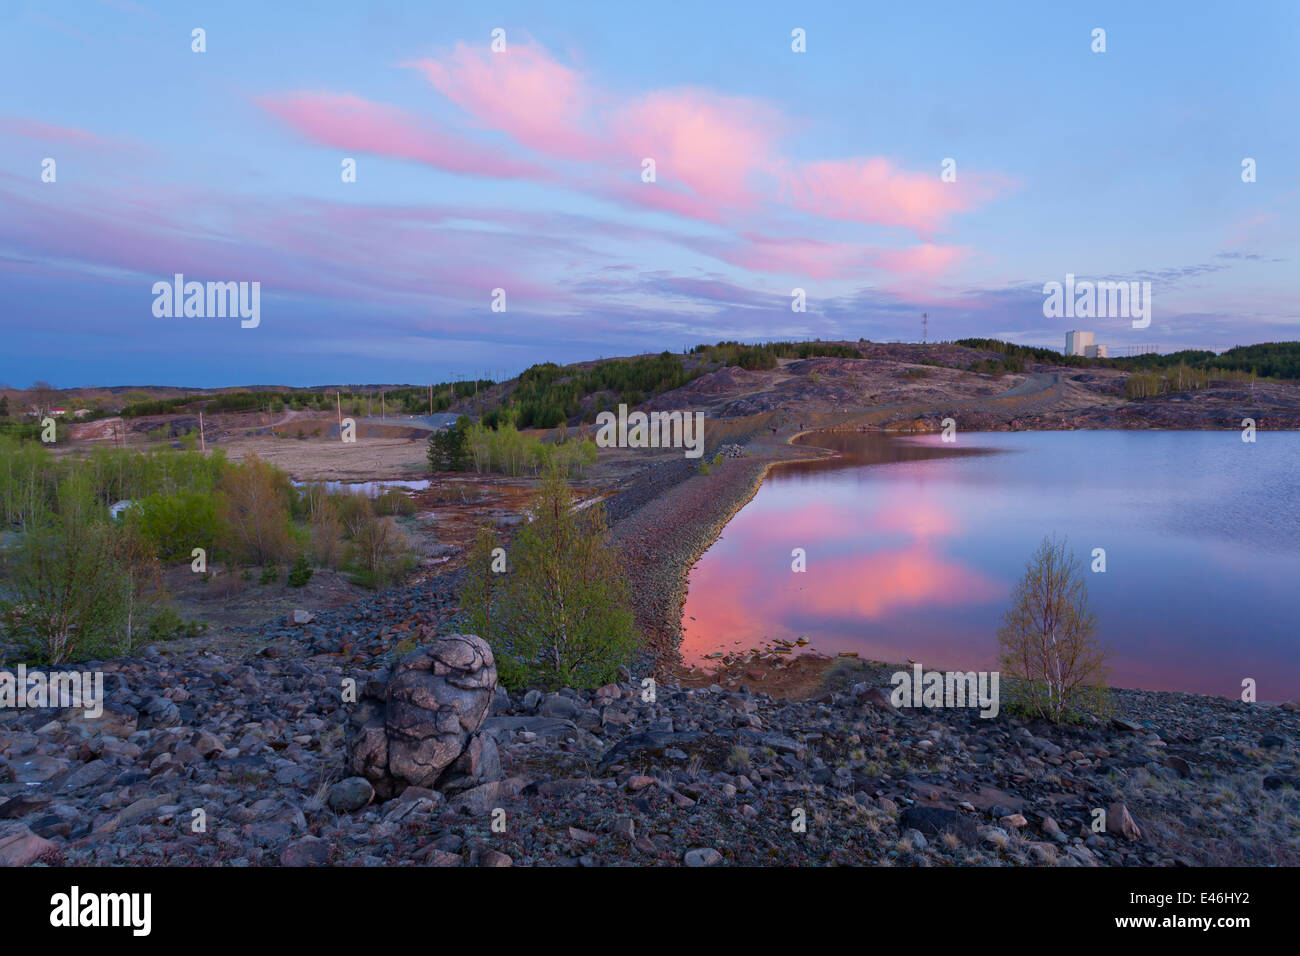 Elevated view of a tailings pond leaking into the surrounding marshland from a hilltop during a colourful sunset. Sudbury. Stock Photo